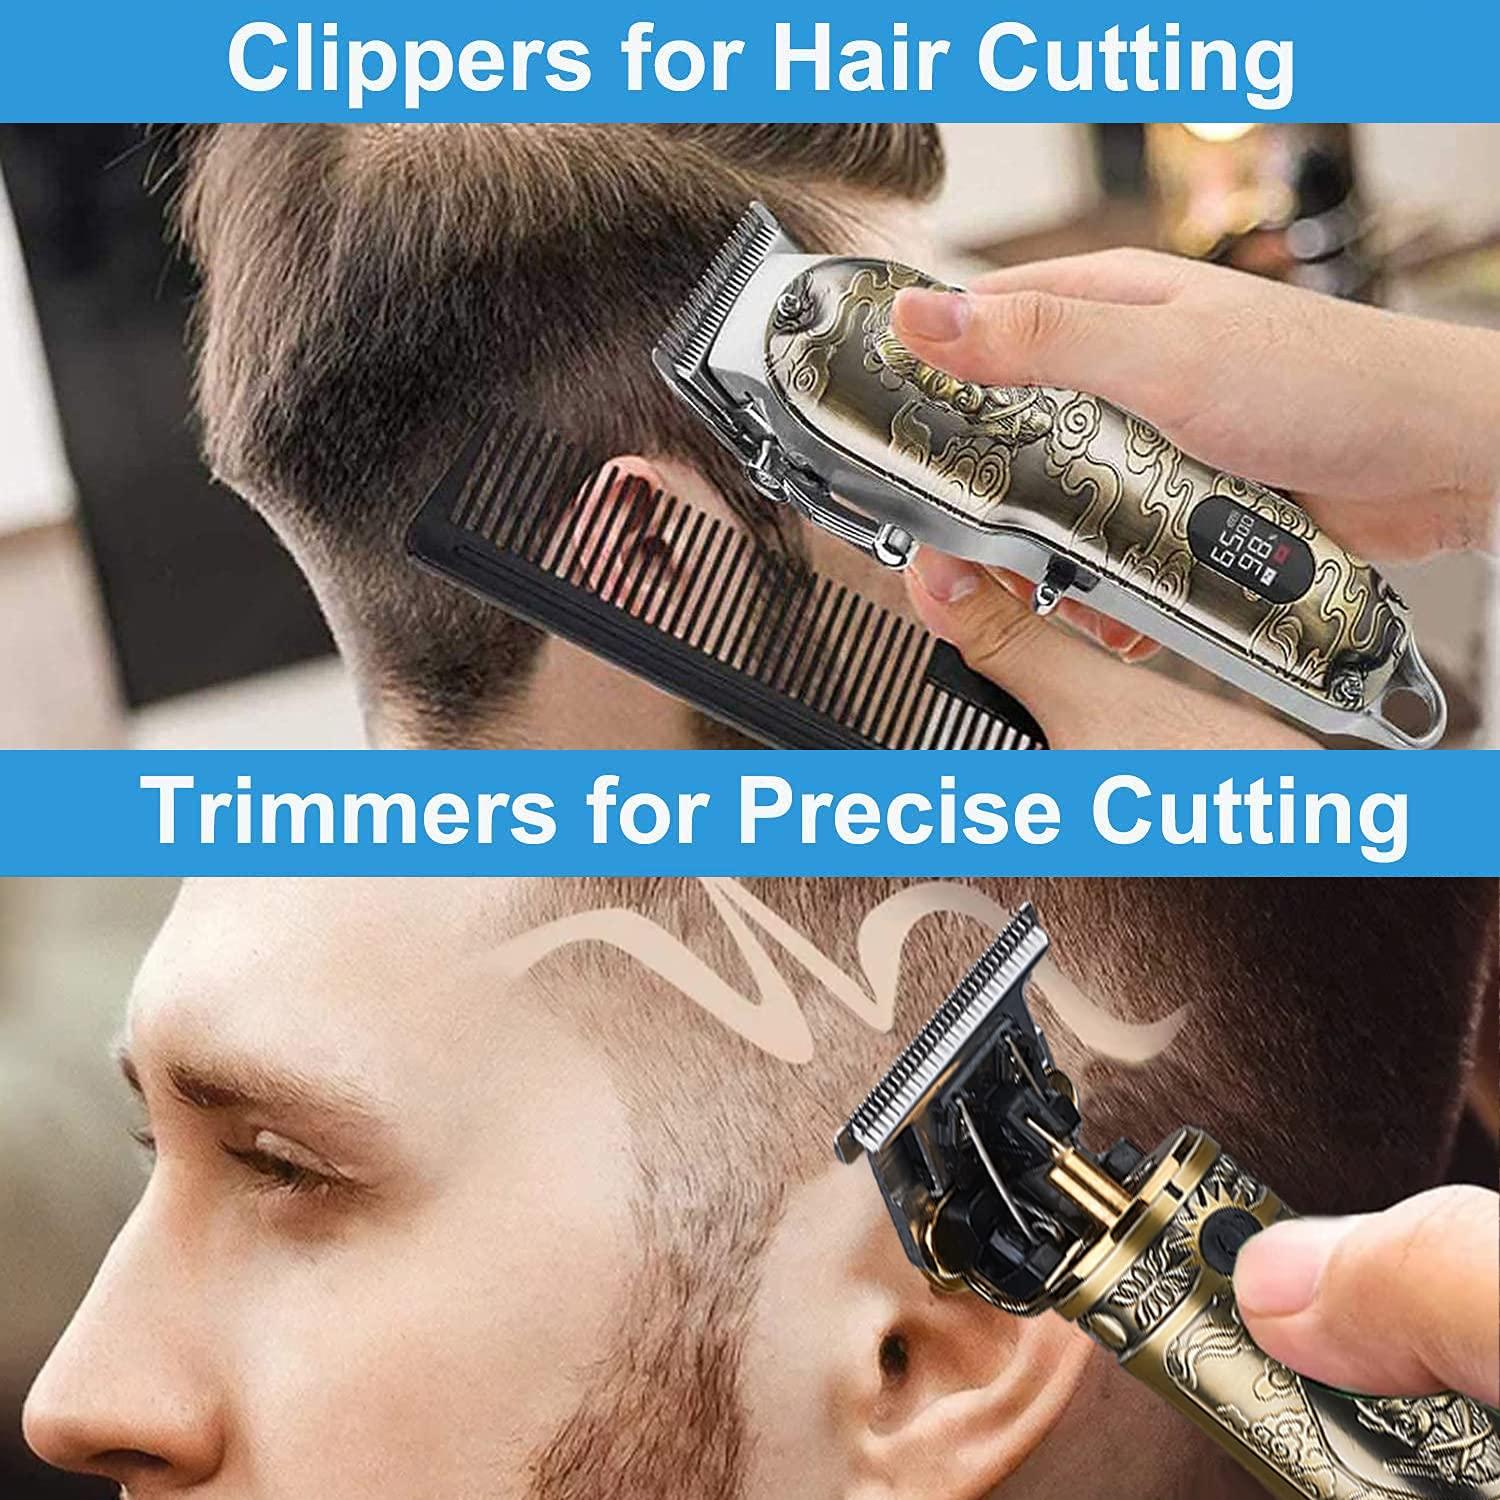 Suttik Hair Clippers for Men, Professional Clippers and Trimmers Set,  Cordless Barber Clippers for Hair Cutting, Beard Trimmer Hair Cutting Kit  with T-Blade Hair Trimmer, LED Display, Gift for Men Gold